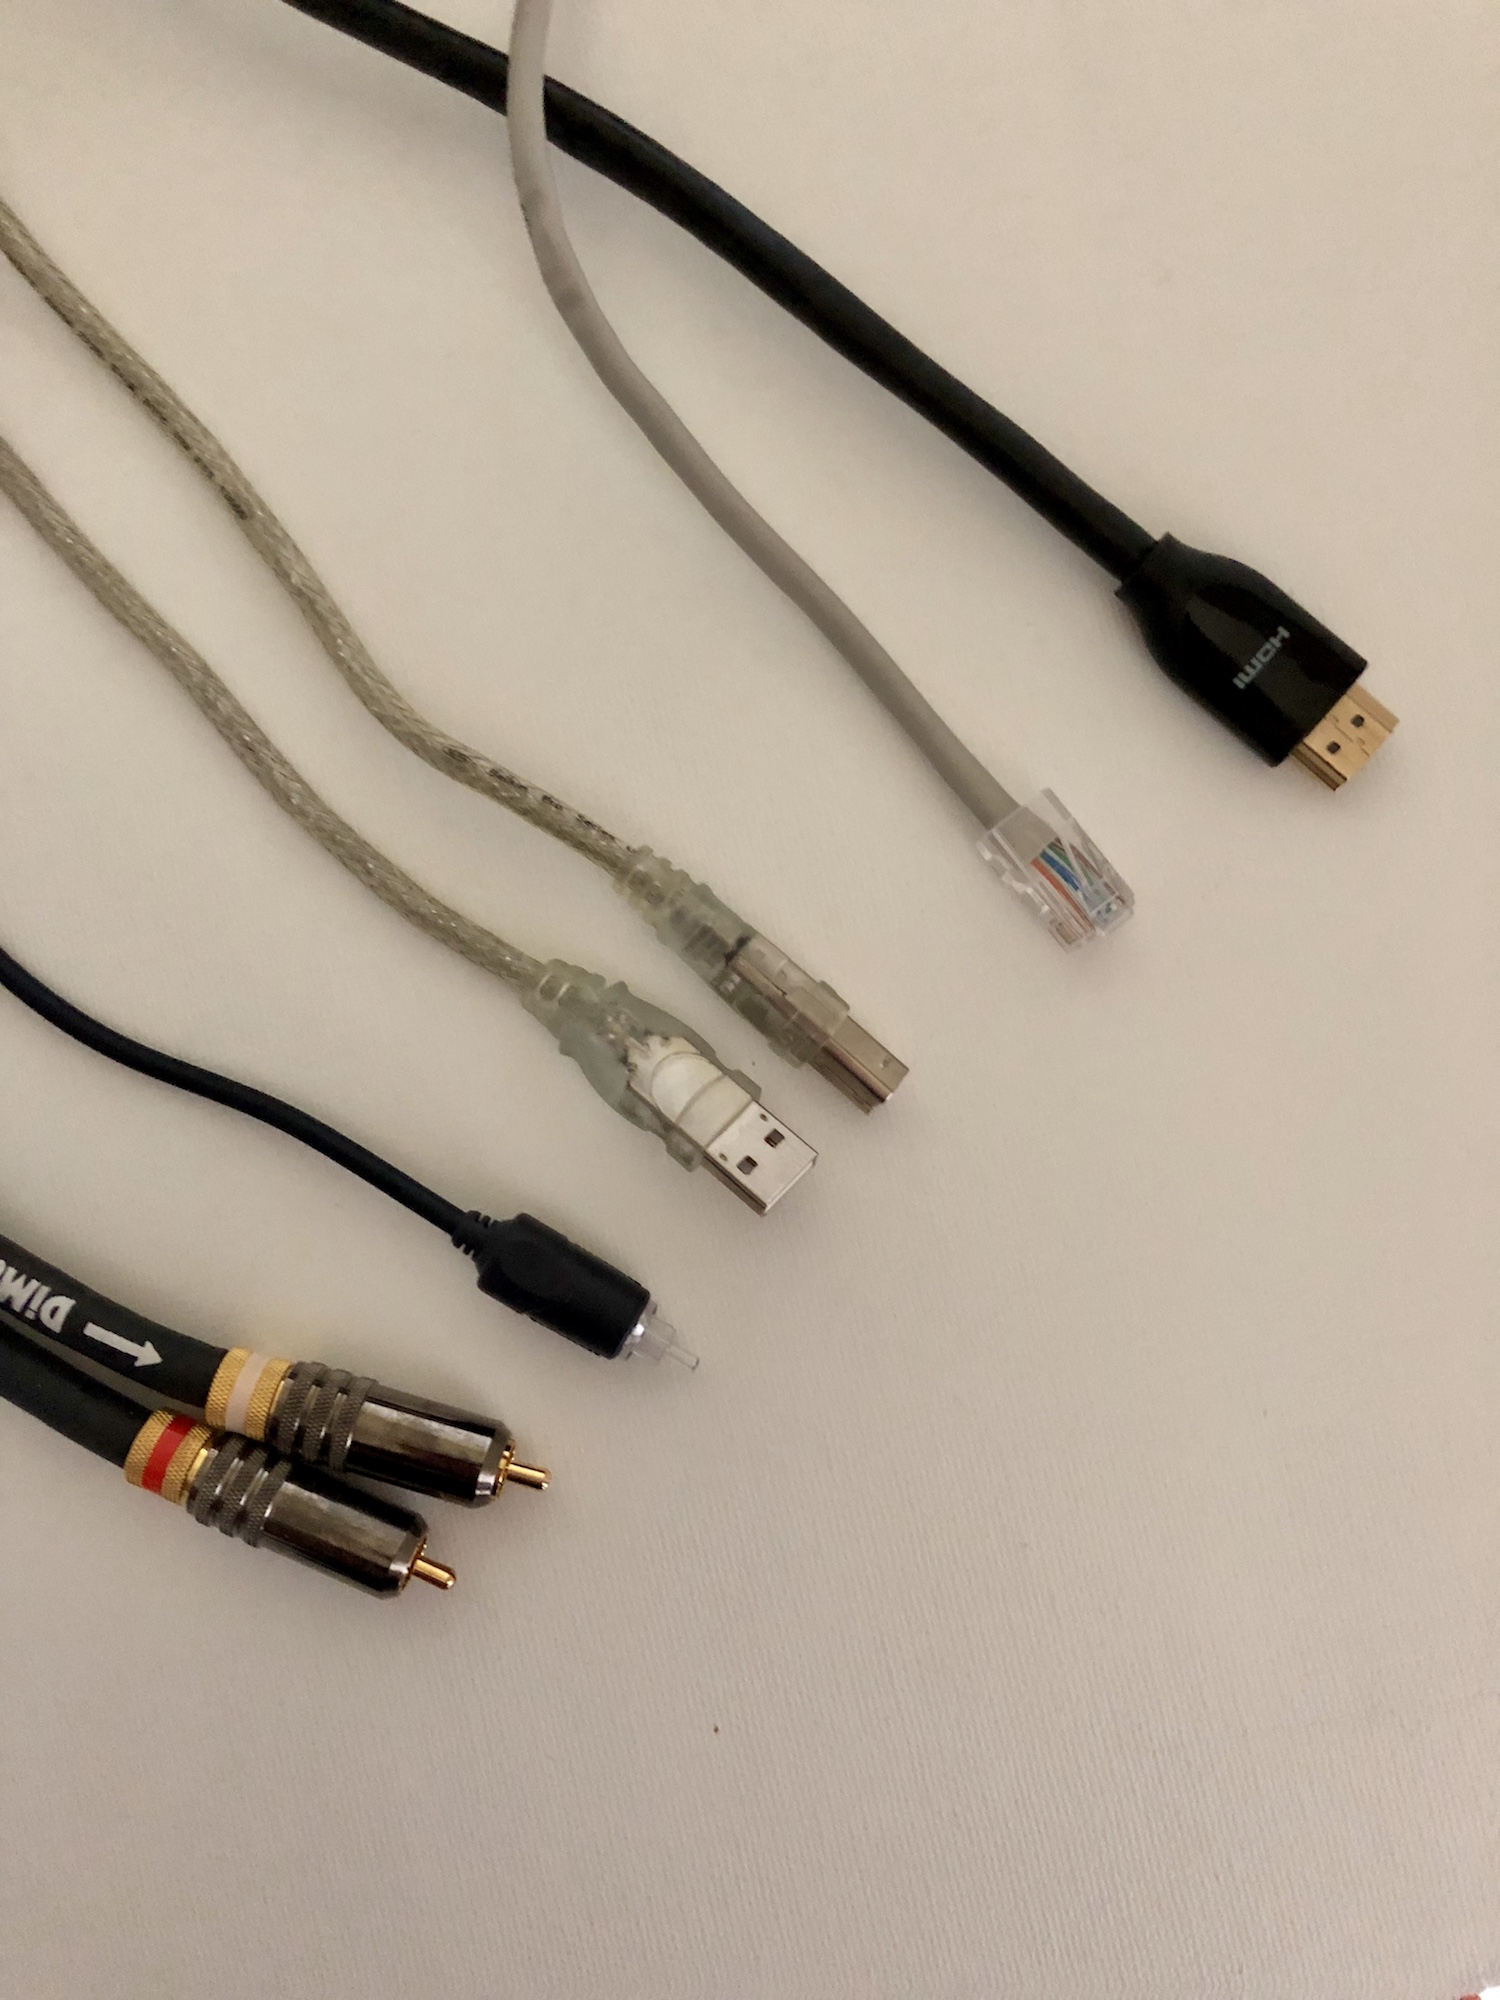 SPDIF Connections Explained